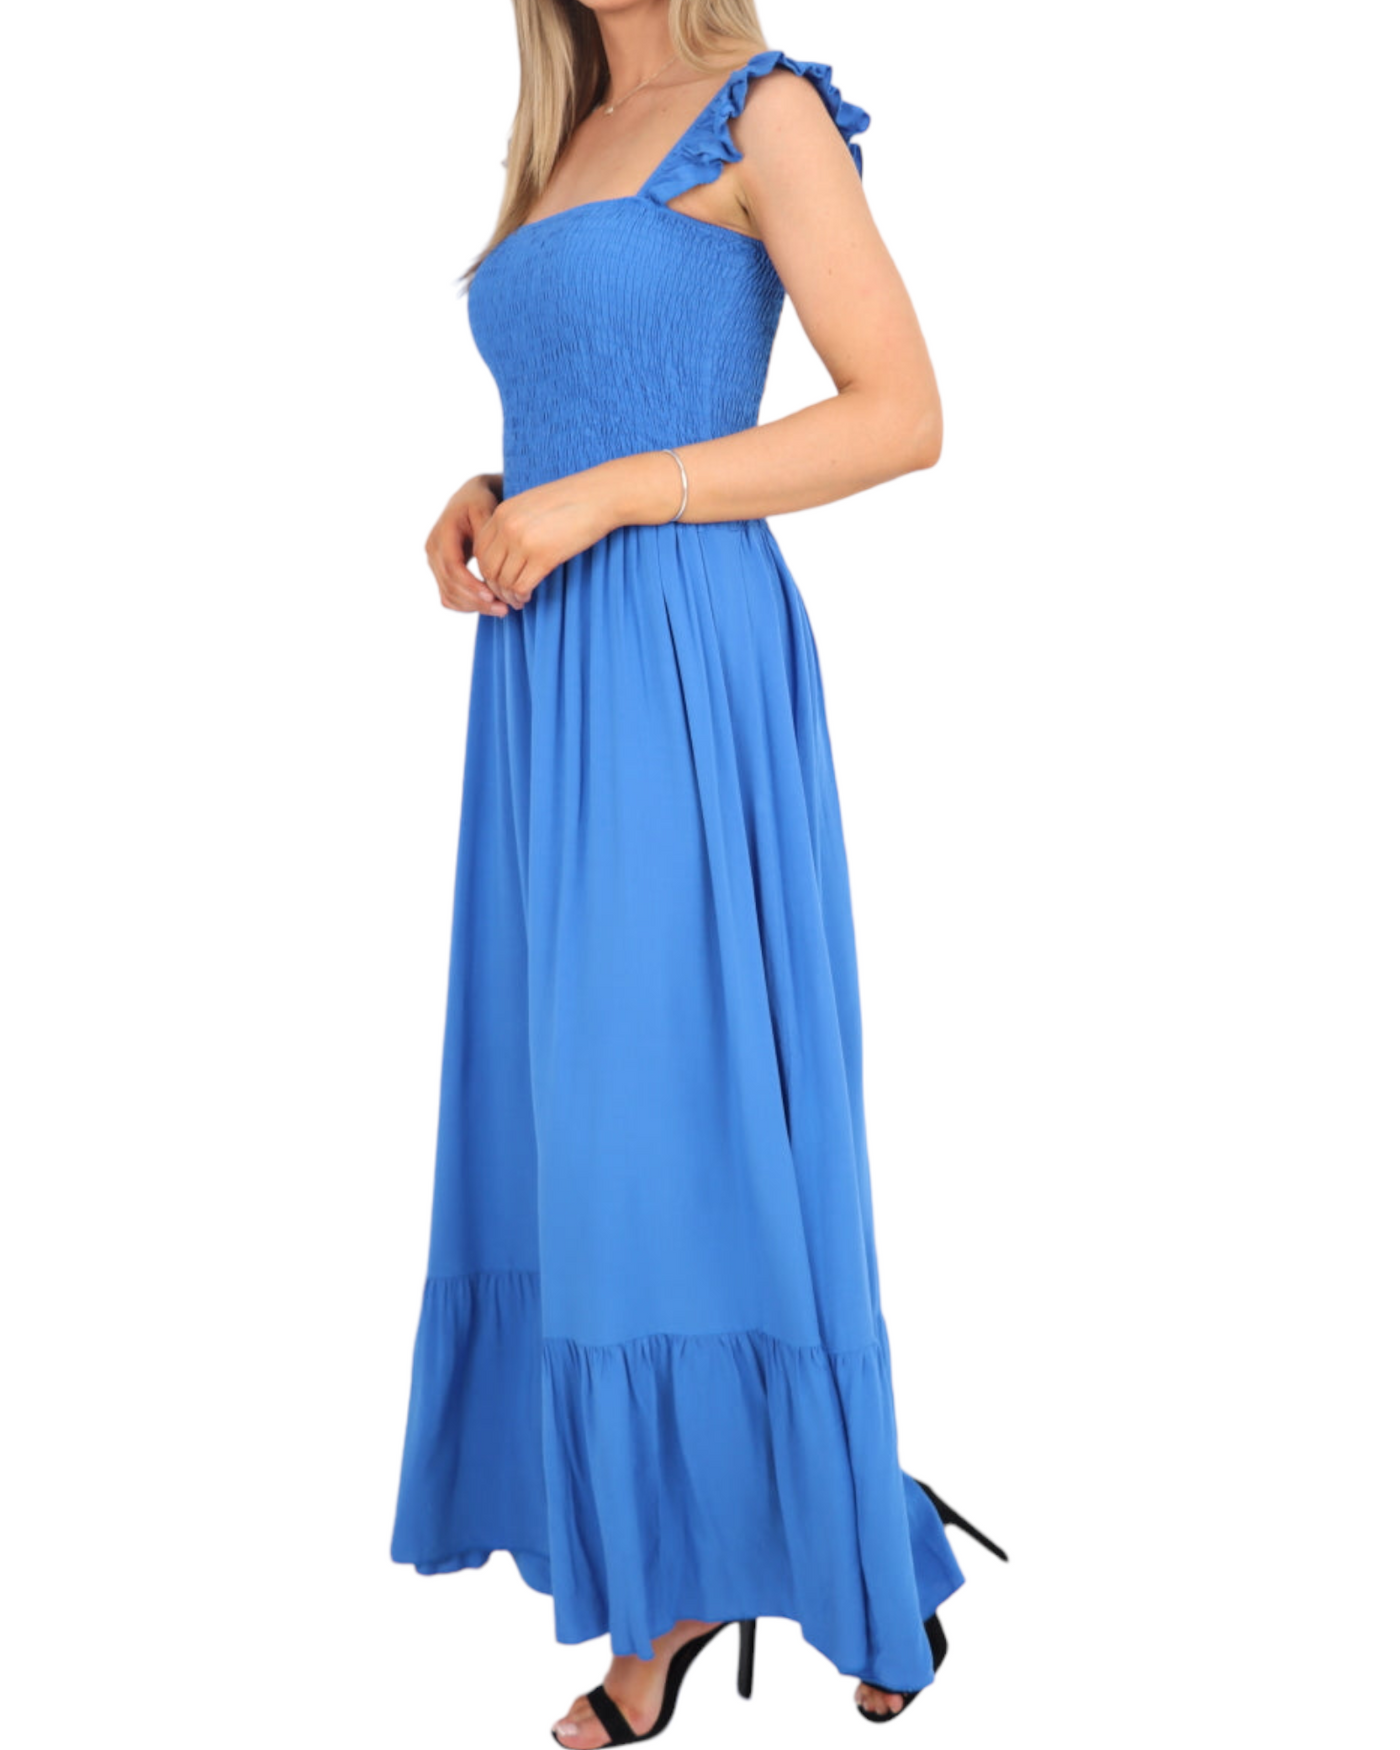 Frill Strap Shirred Elasticated Tiered Maxi Dress